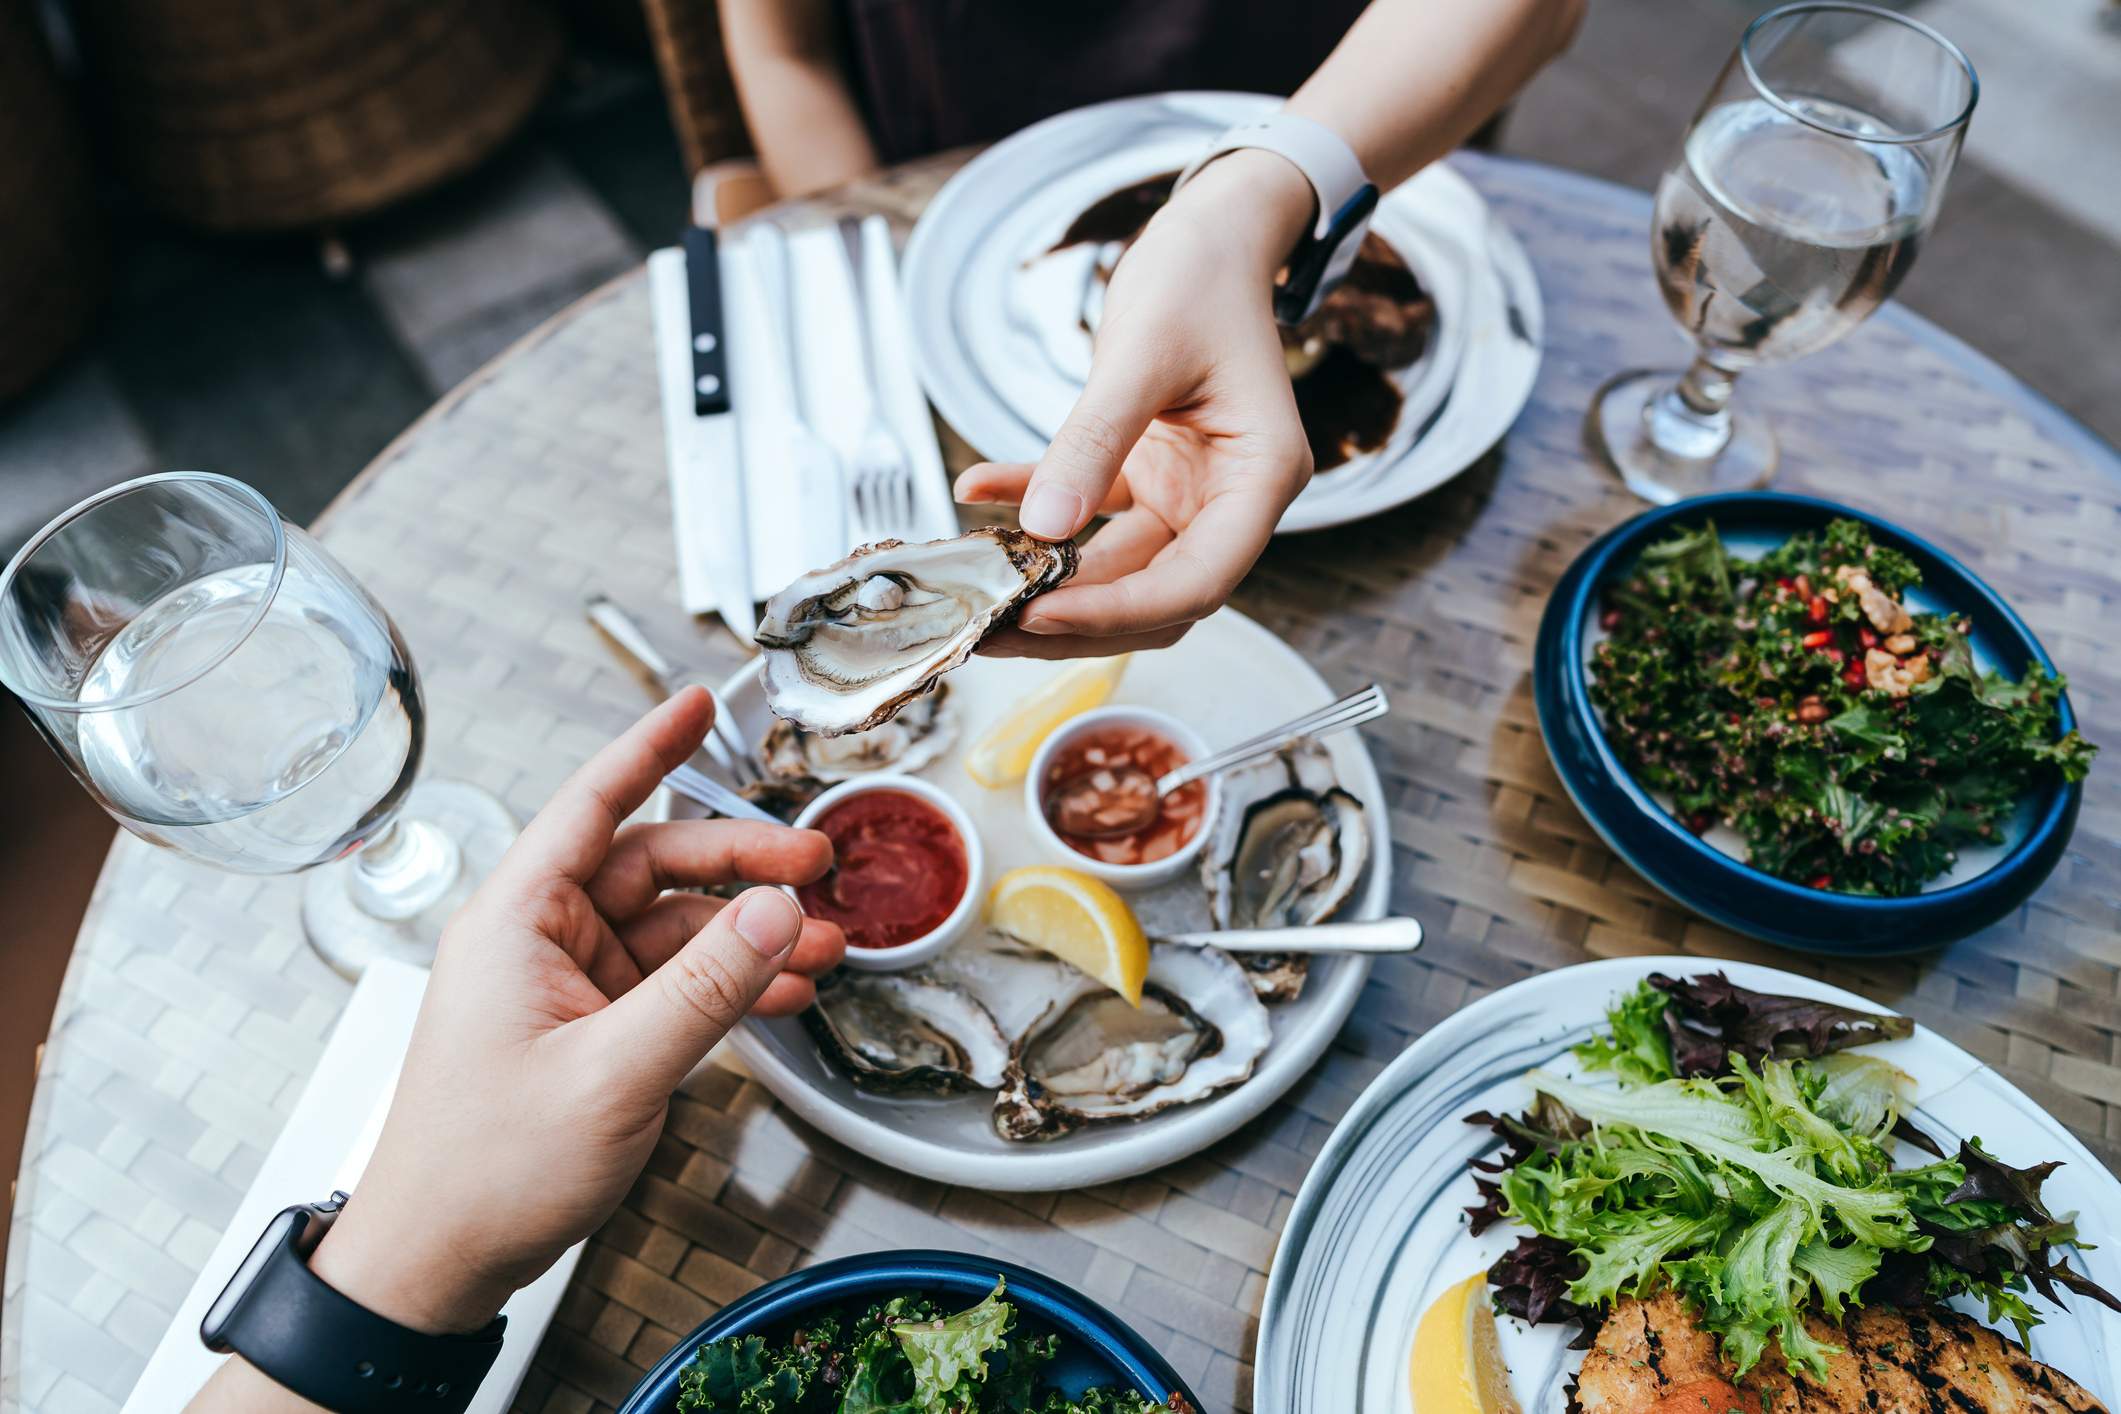 Image depicts two people sitting at a restaurant sharing oysters. There are other plates of food on the table. 